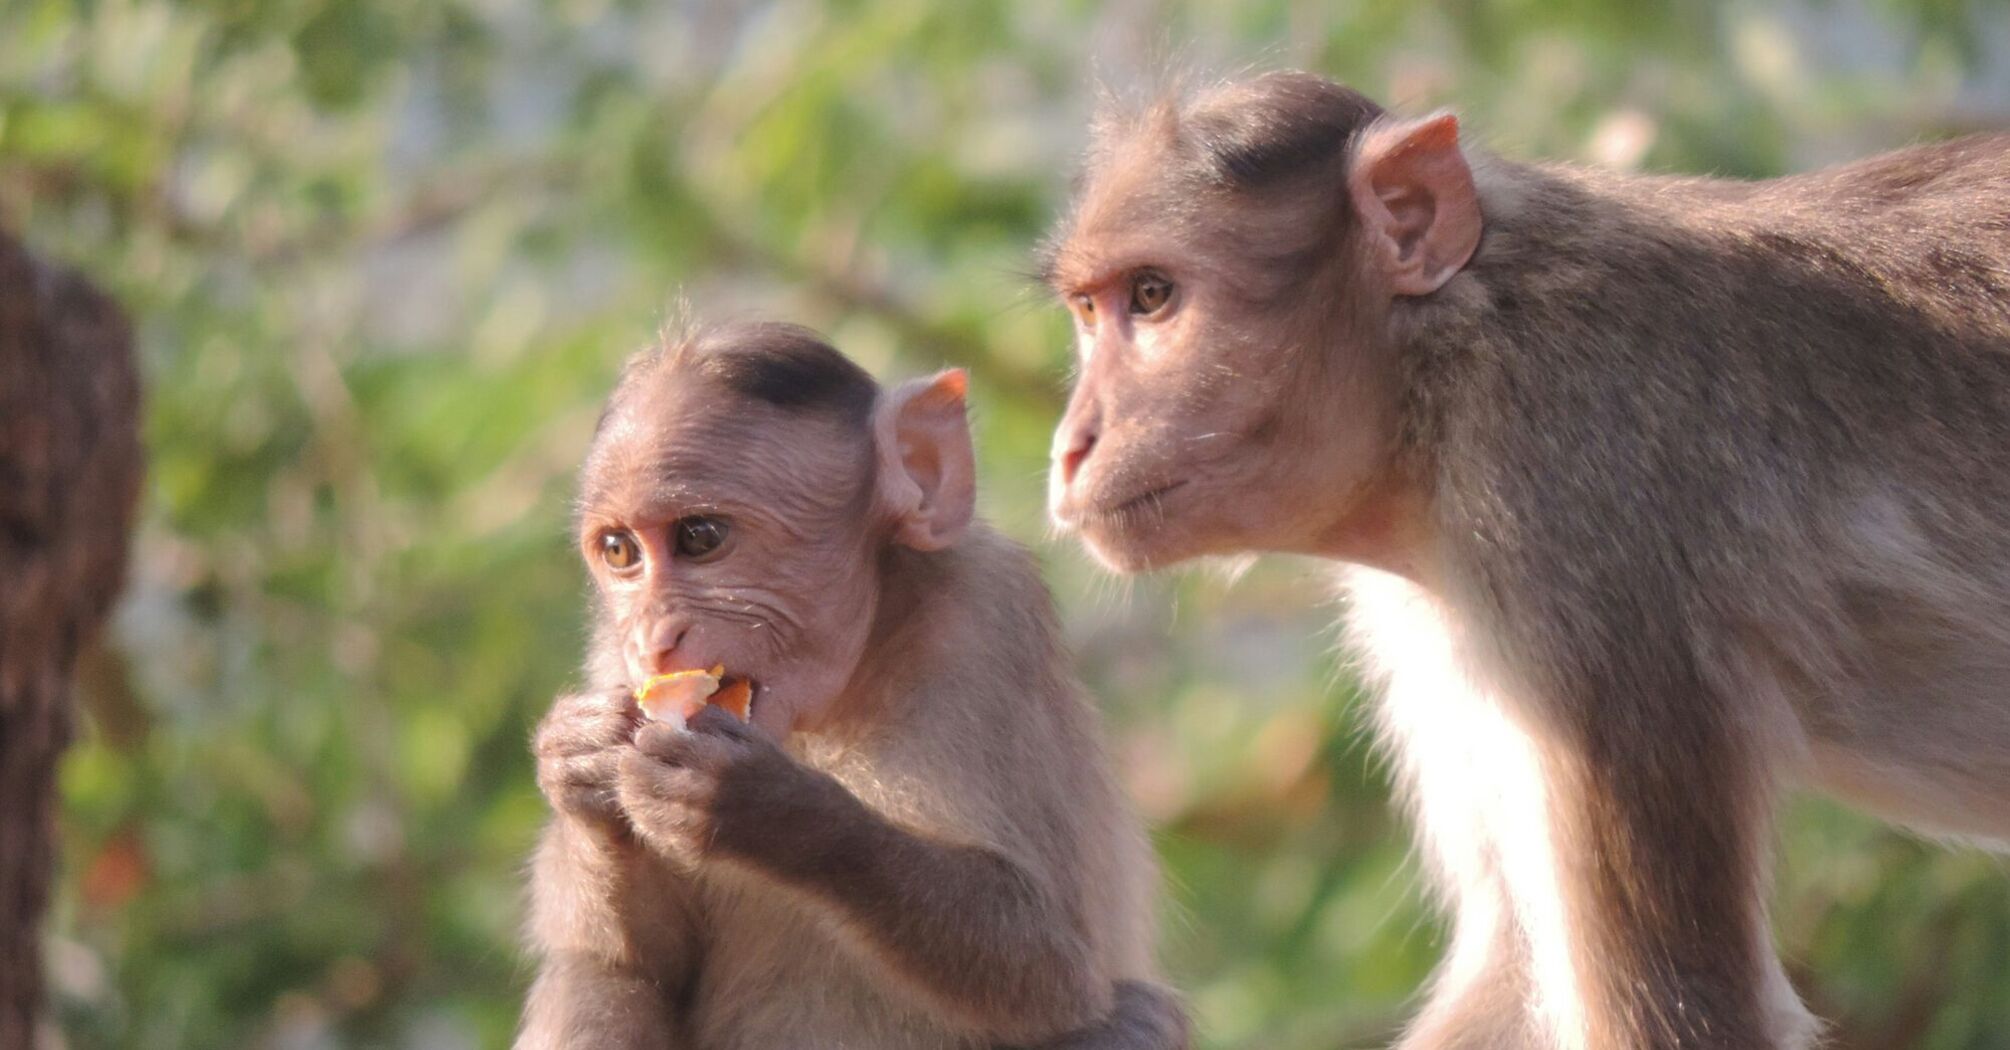 Two monkeys on a ledge, one eating, in natural light